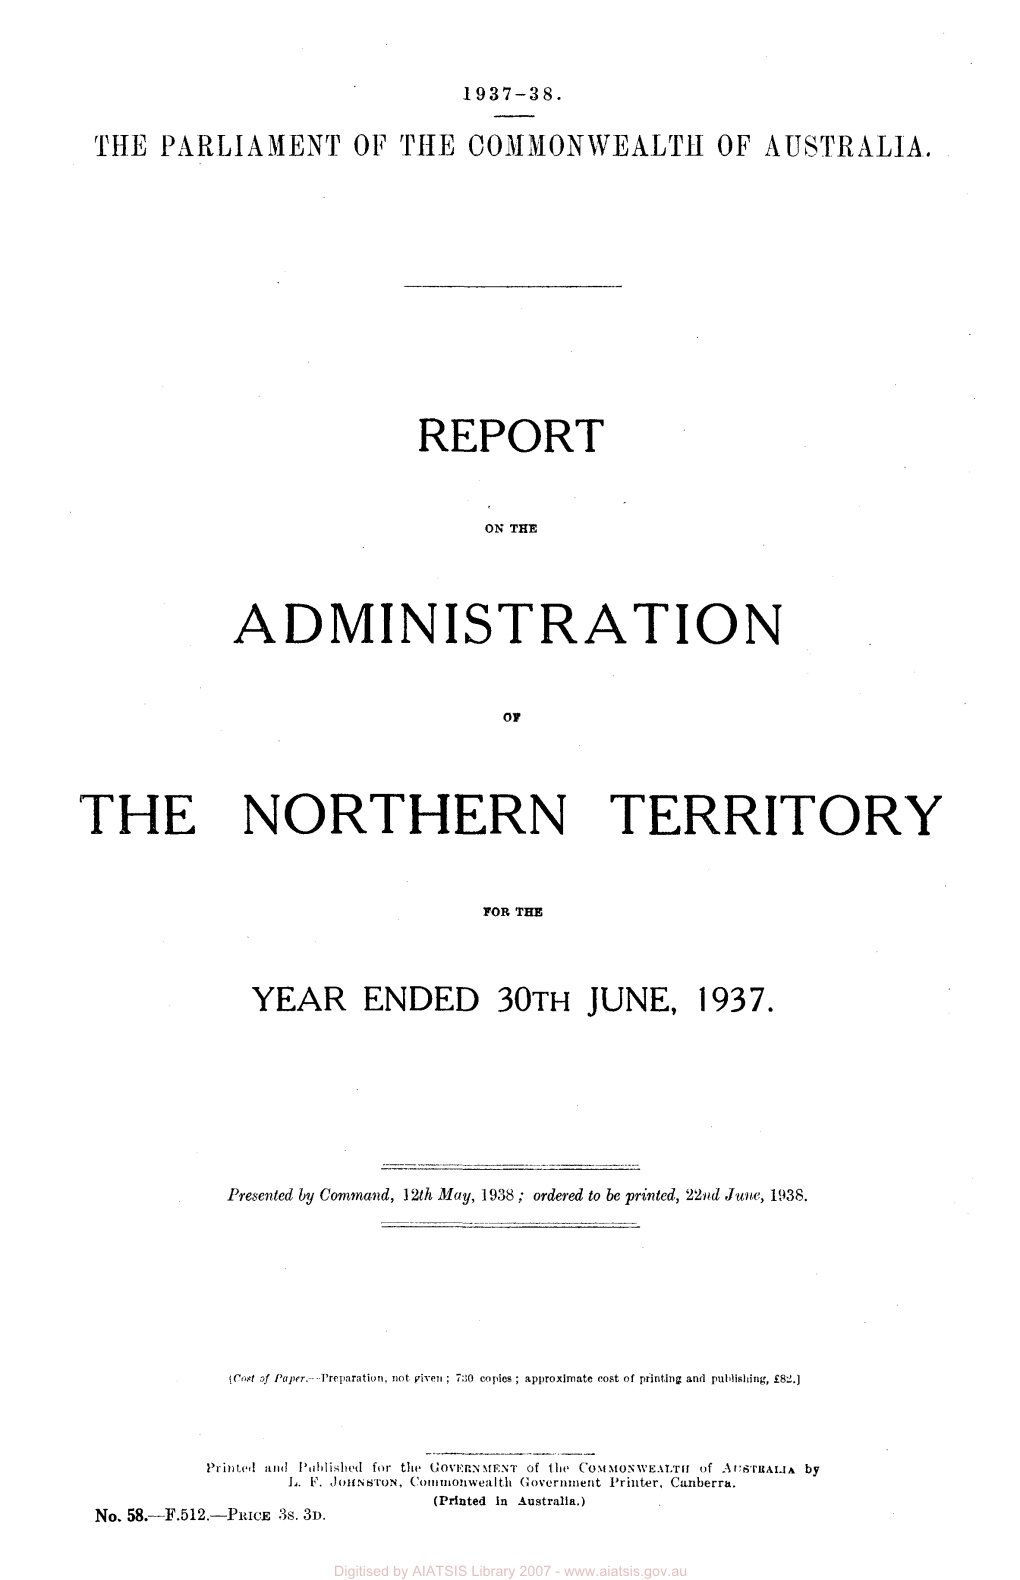 Report on the Administration of the Northern Territory for the Year